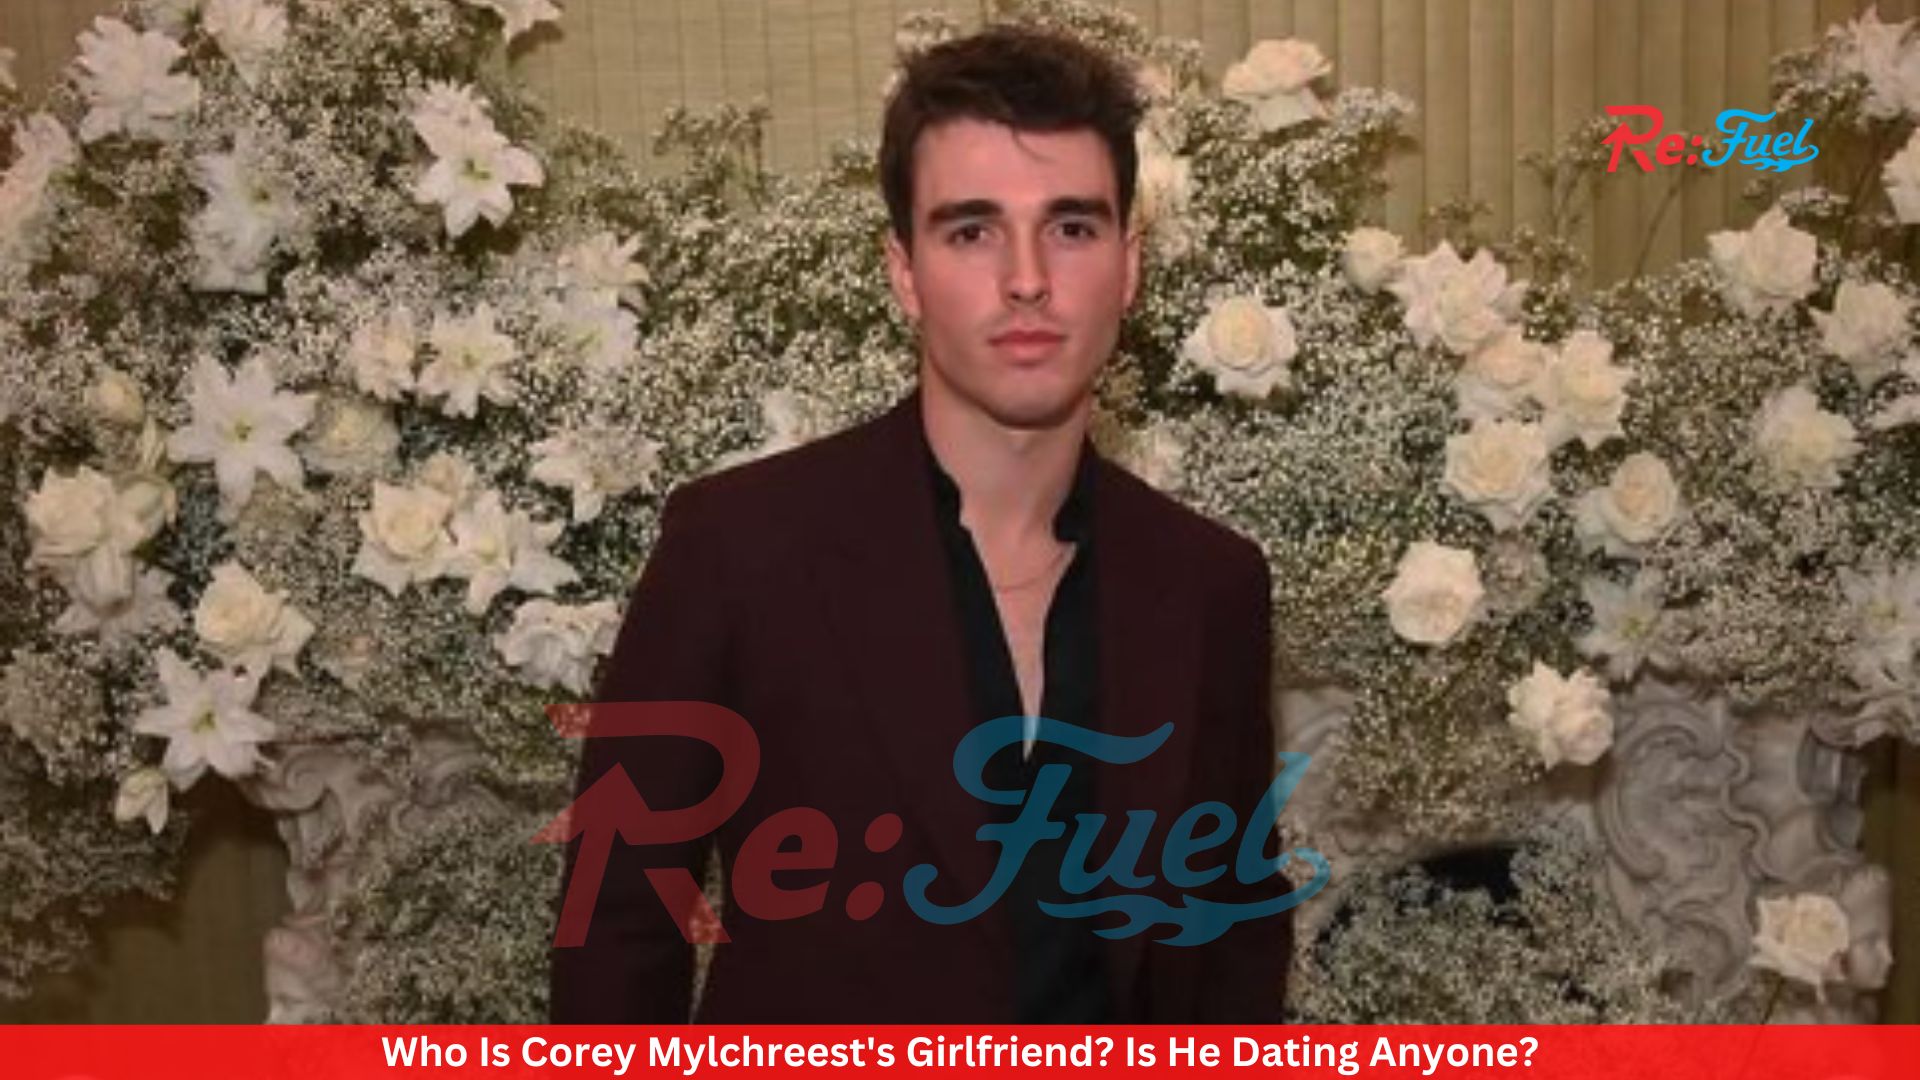 Who Is Corey Mylchreest's Girlfriend? Is He Dating Anyone?